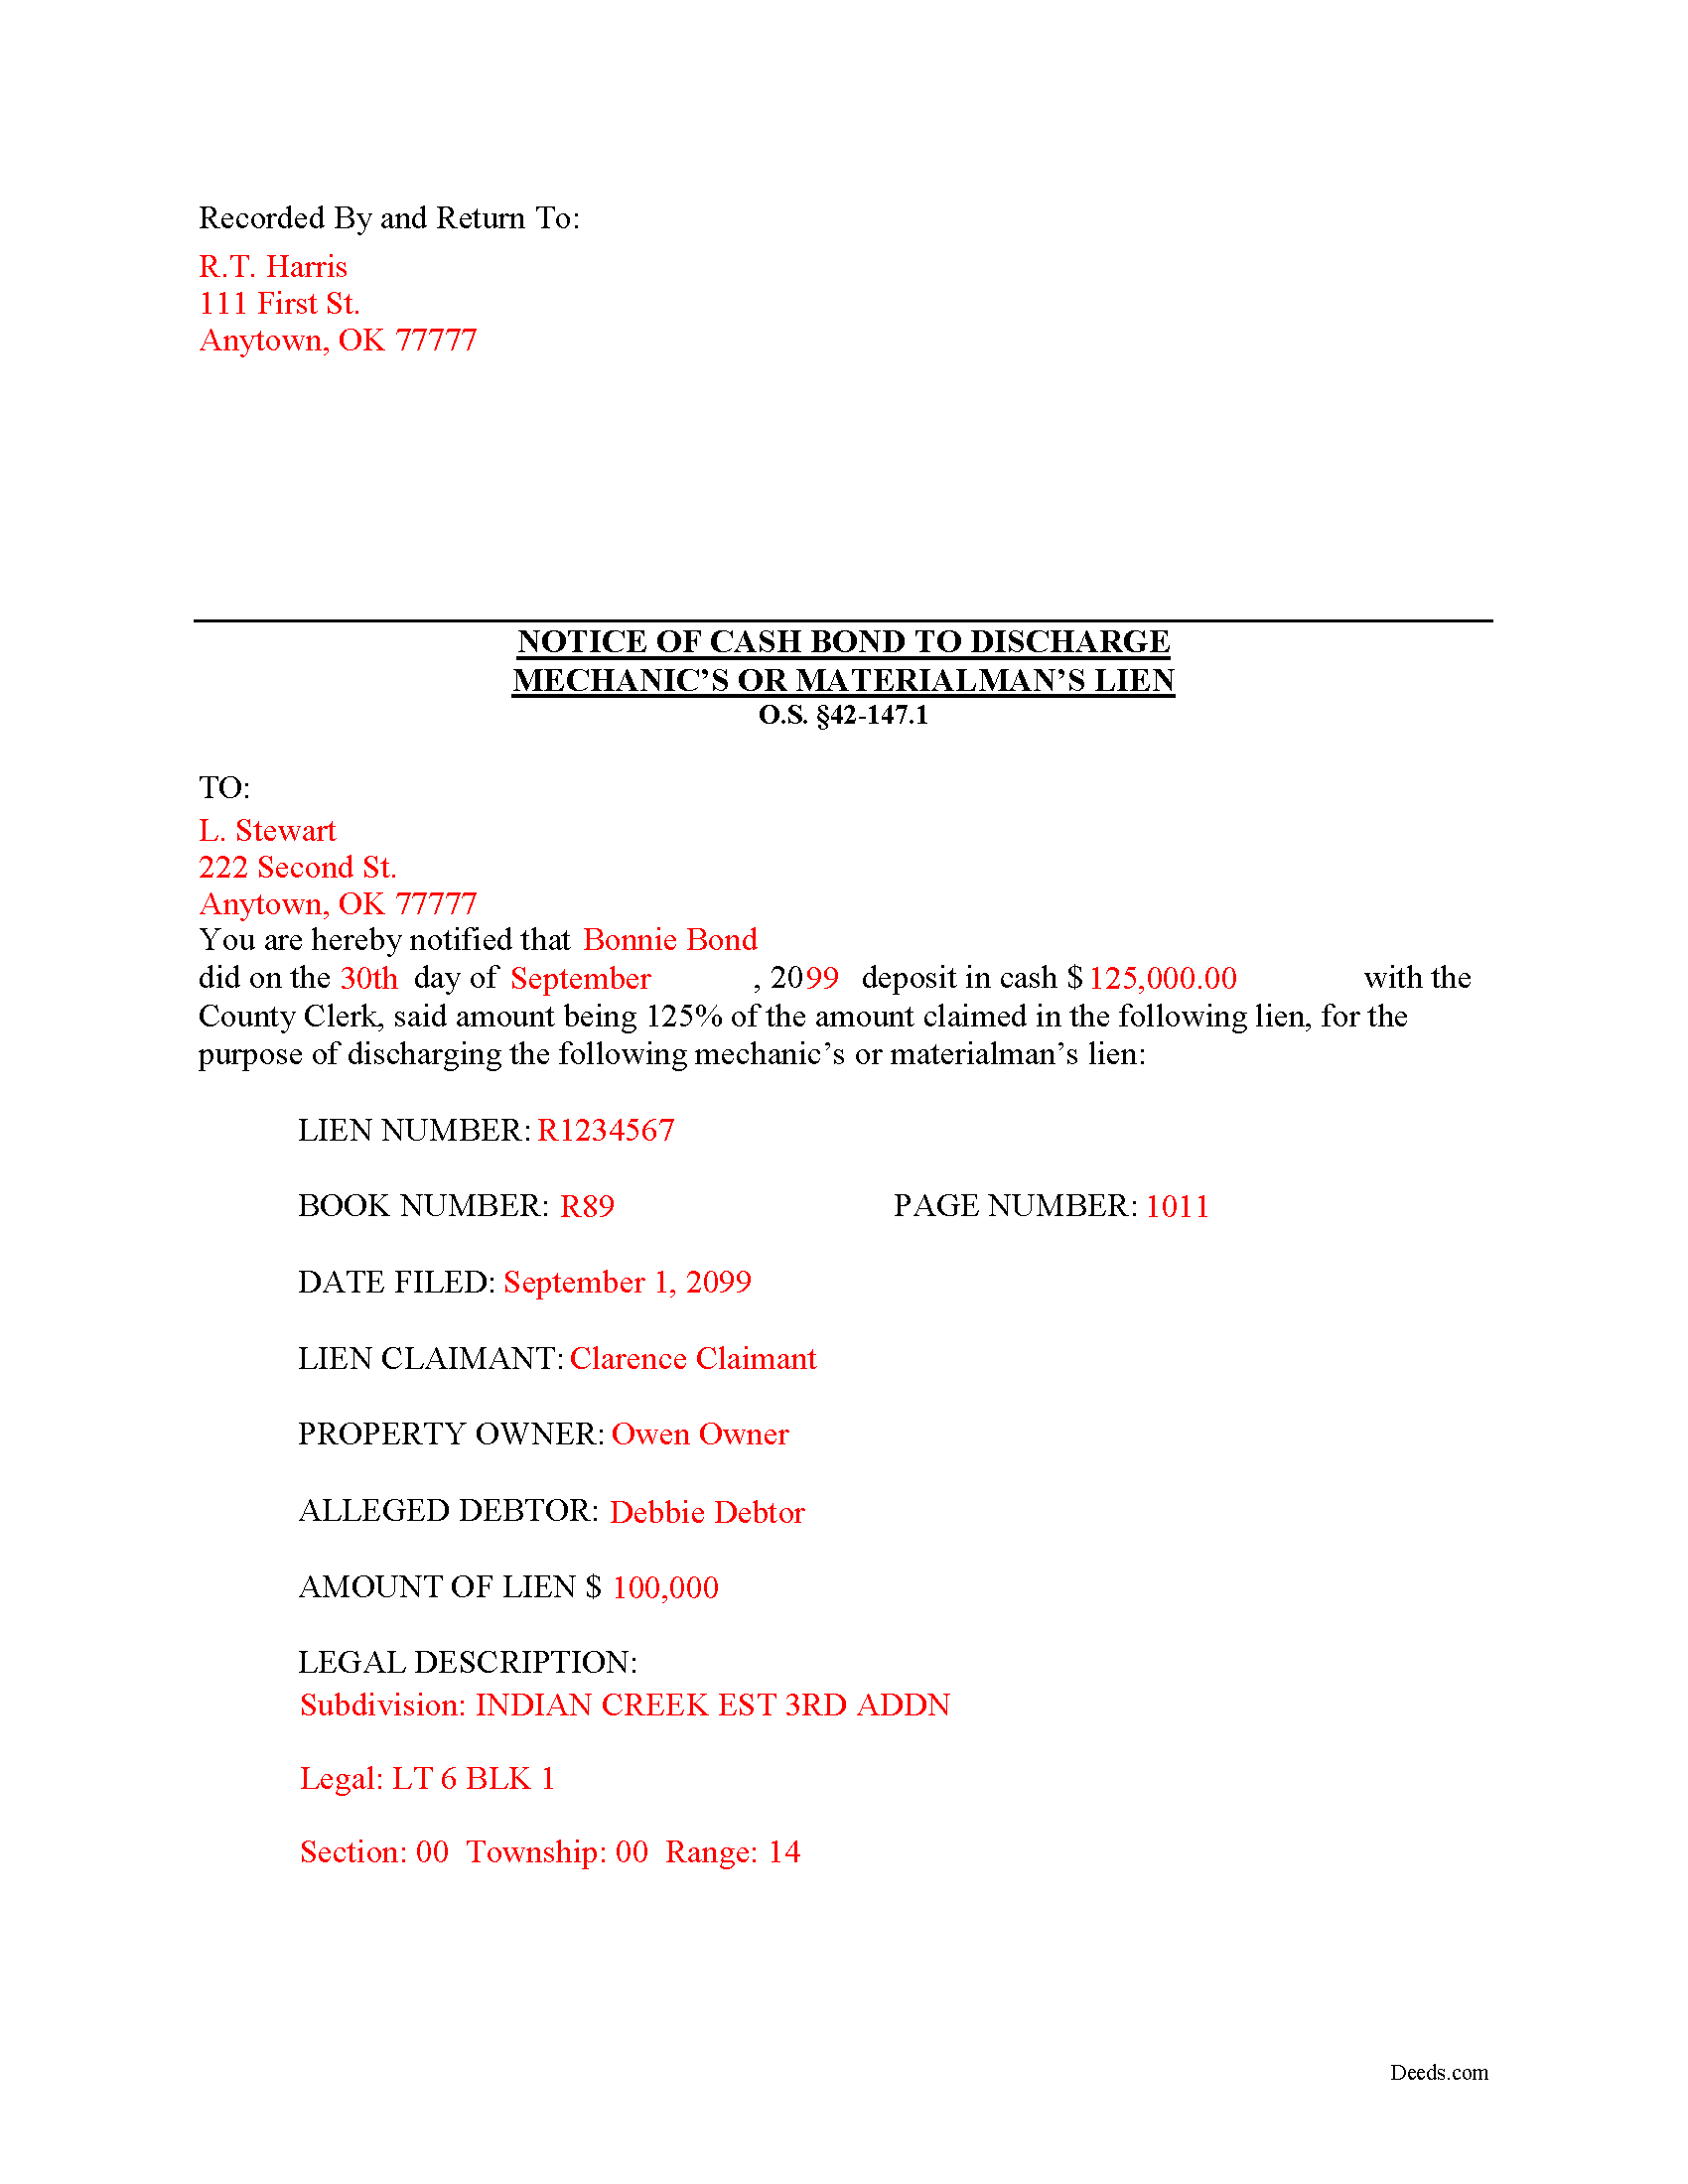 Completed Example of the Notice of Bond to Discharge Lien Document